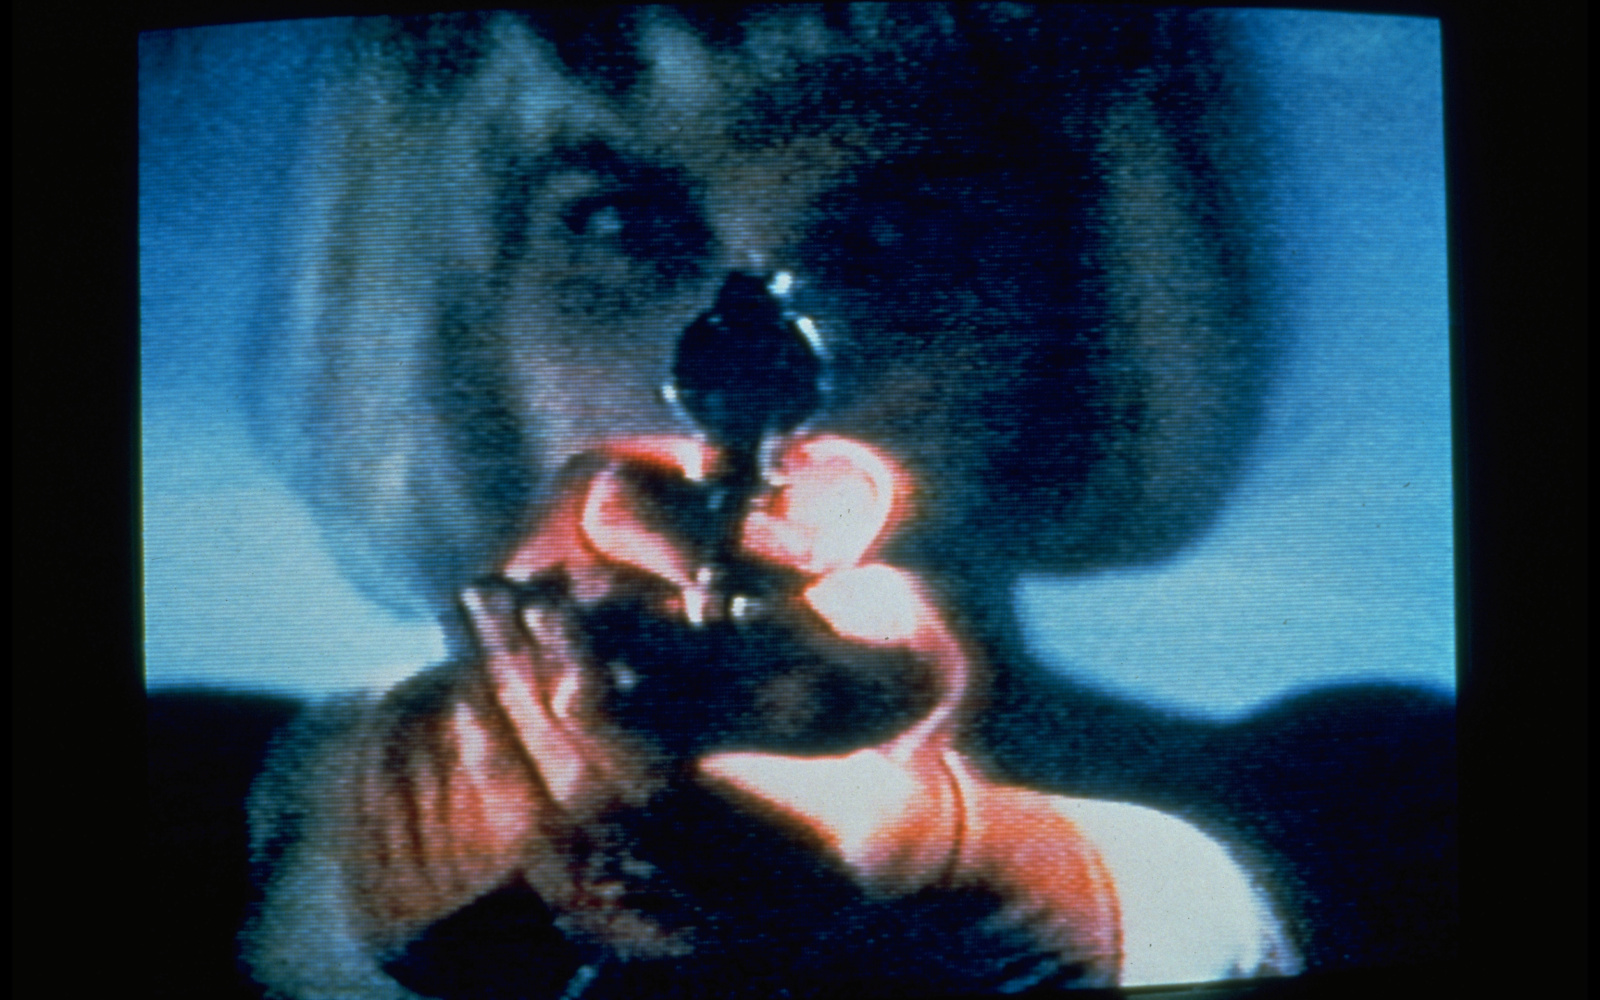 Lynn Hershman Leeson, Still from the Installation Room of One's Own, 1995